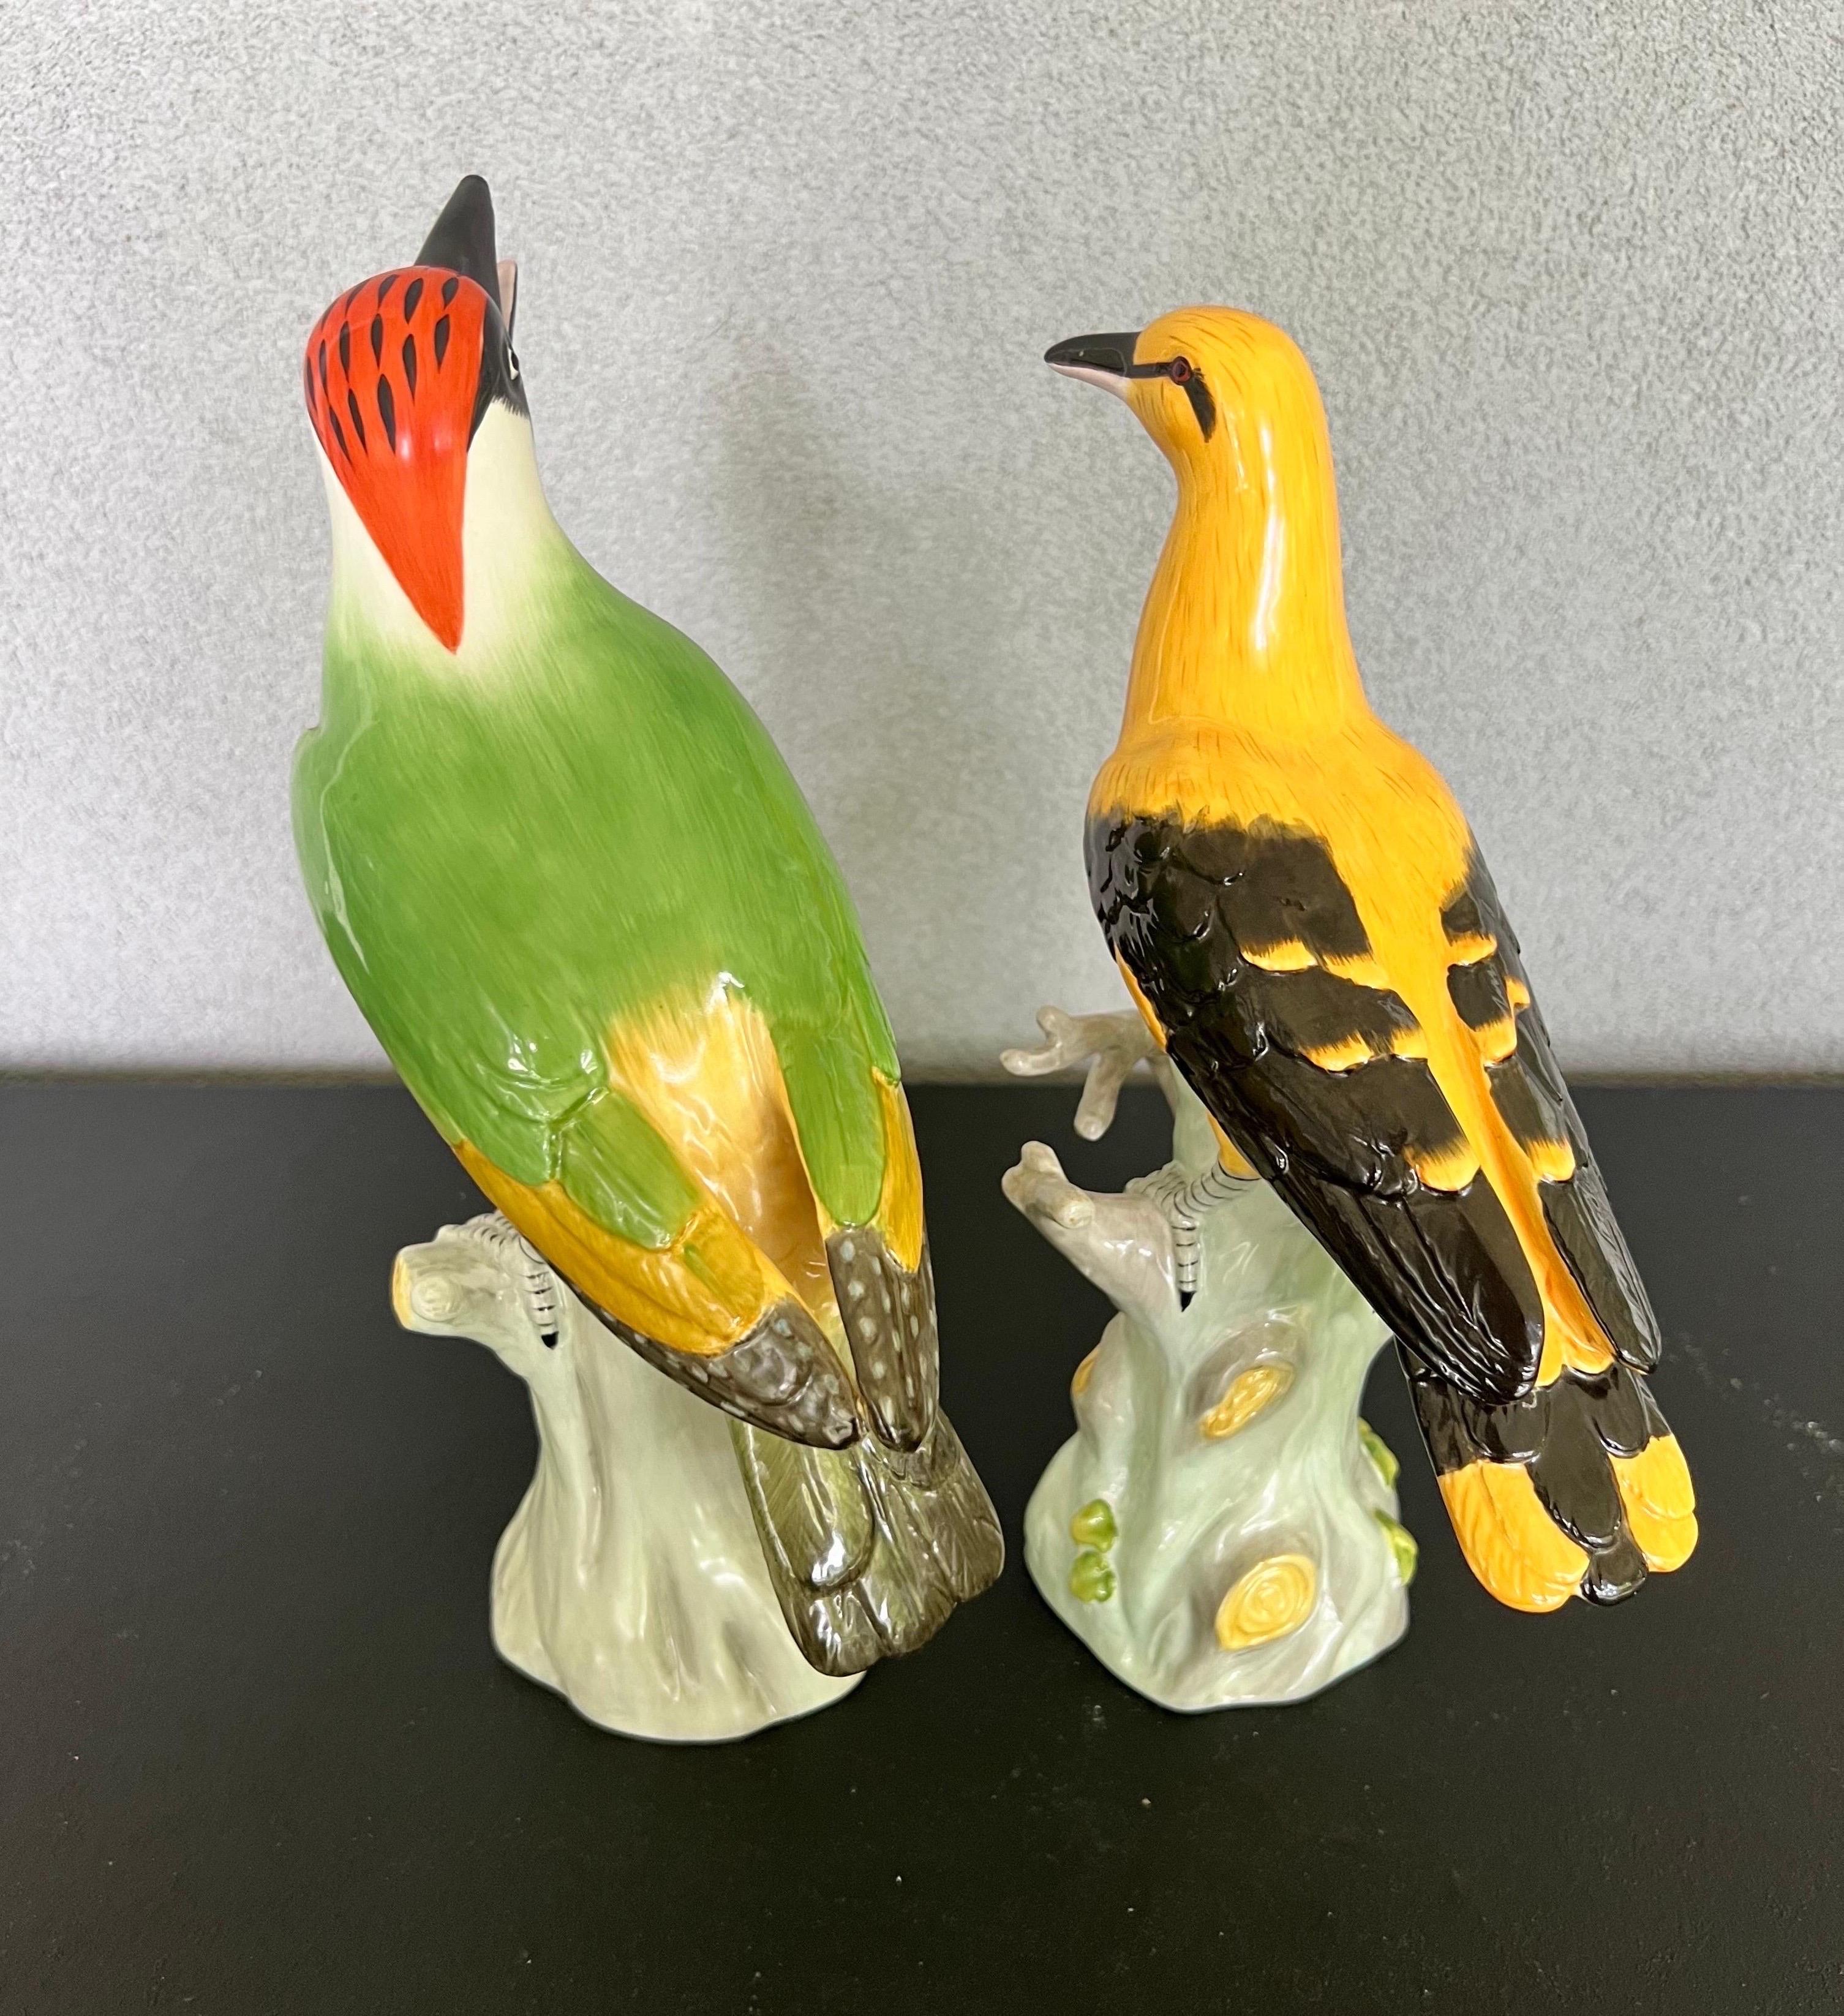 Gorgeous pair of porcelain hand-painted birds standing on a branch 
Made by Jeanne Reed’s for the Historic Charleston Foundation 
This pair would look stunning on a fireplace mantle ! colors are rich and details are beautiful 
Made in China 